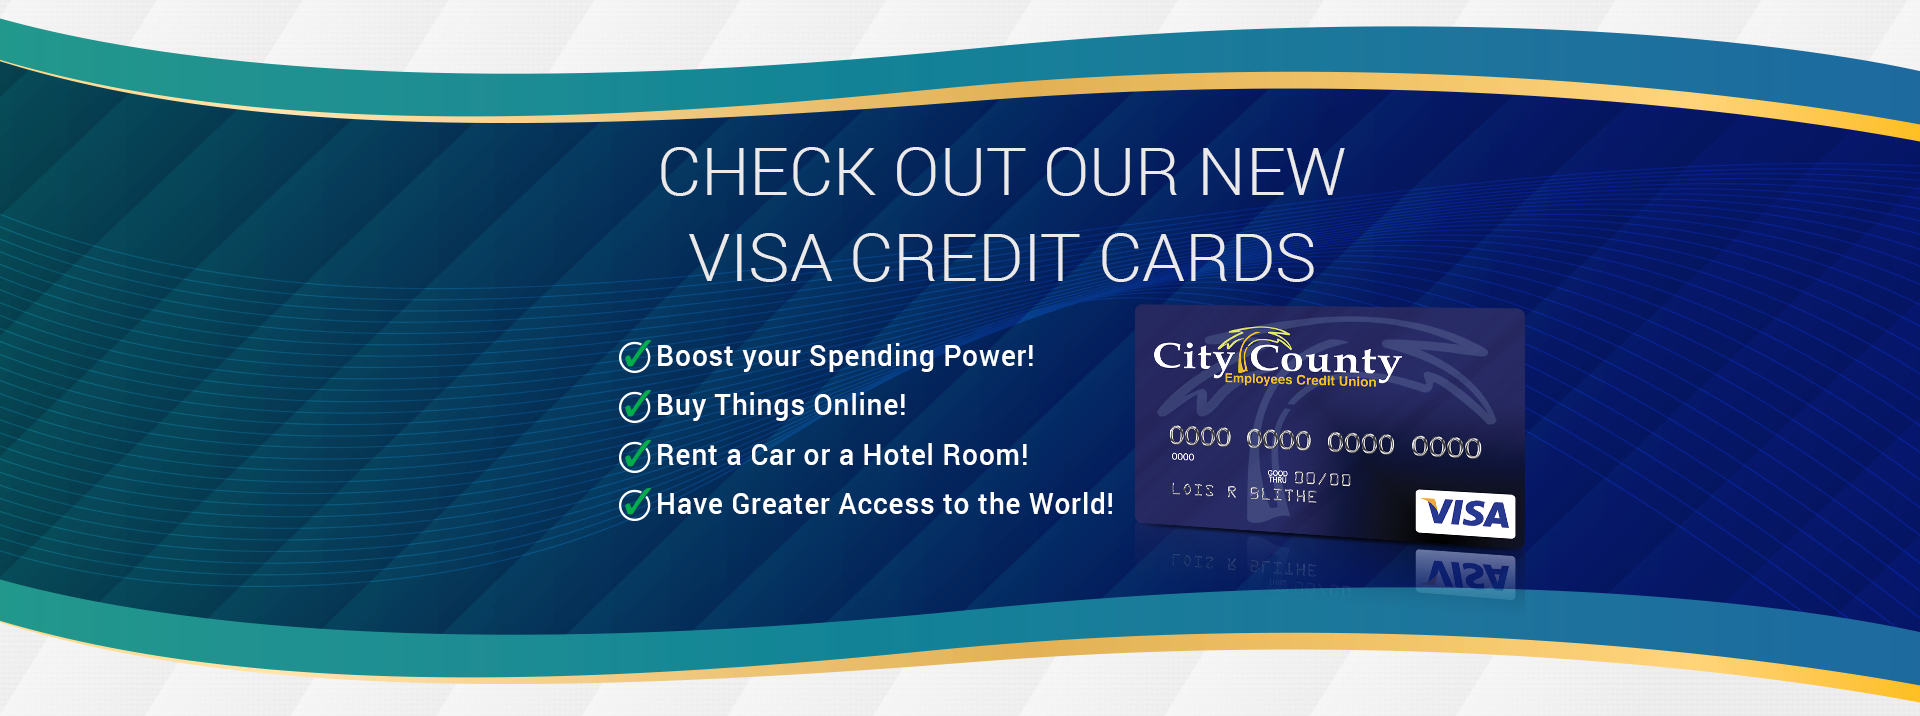 Check out our new visa credit cards